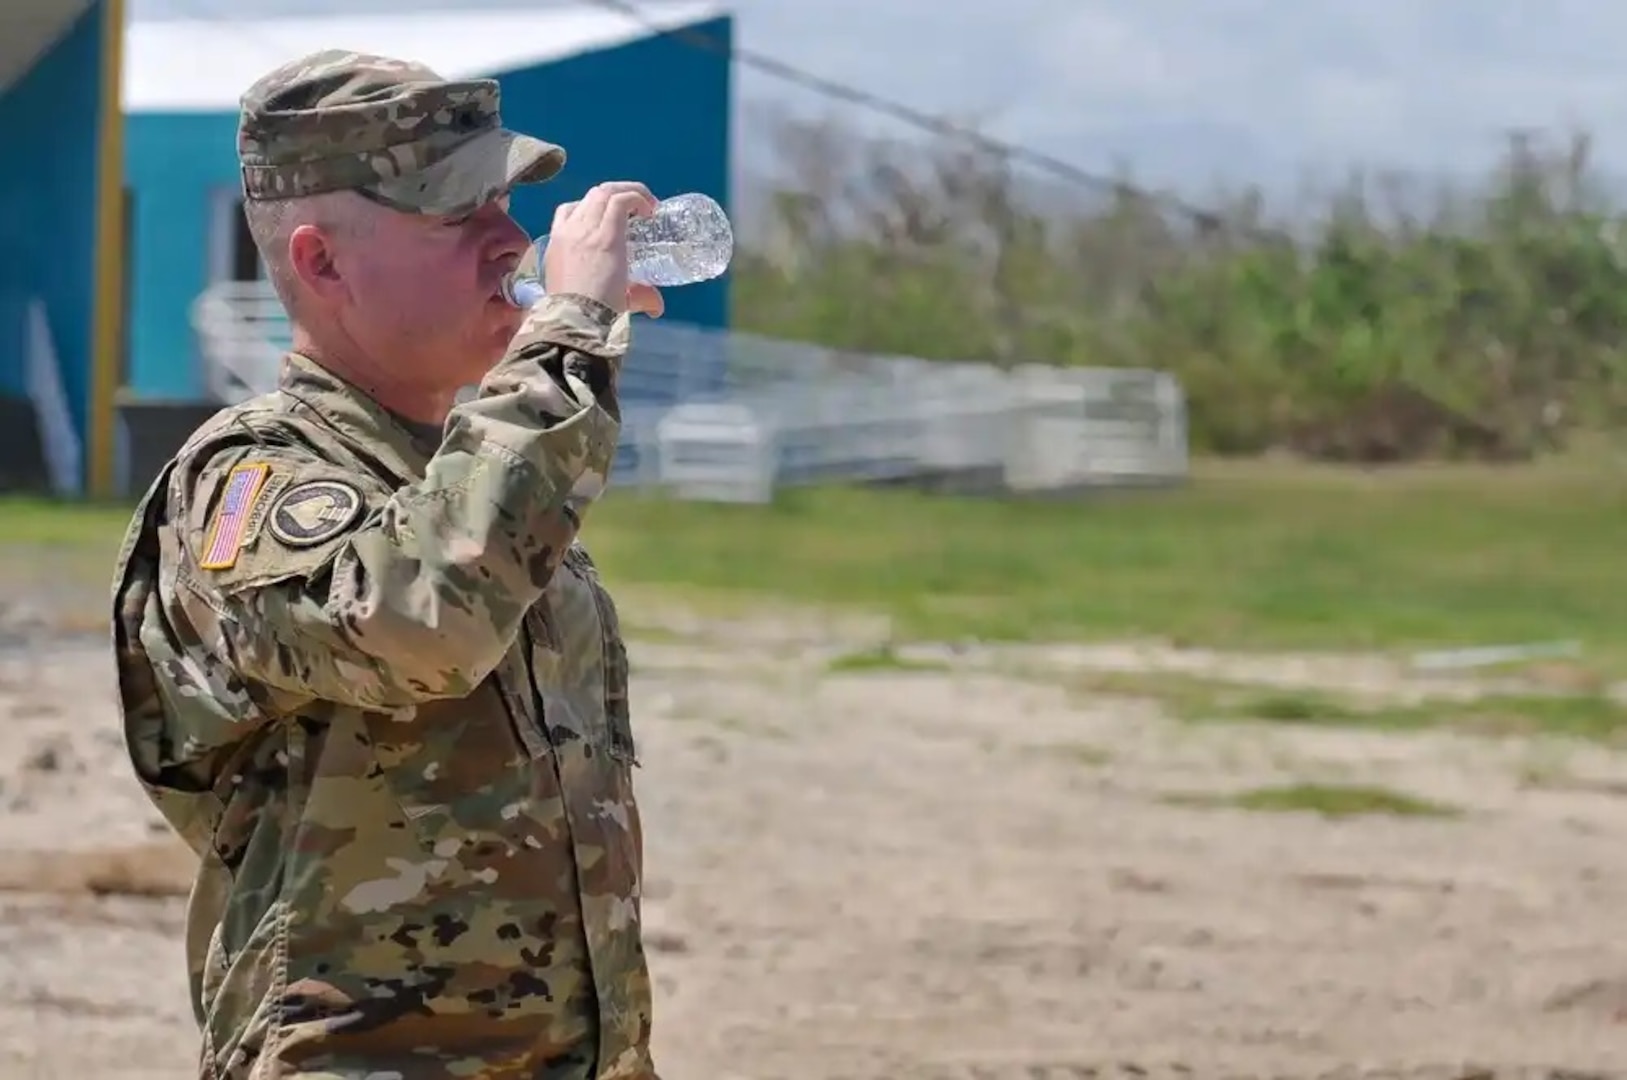 Brig. Gen. Christopher Mohan, commanding general of the 3RD Expeditionary Sustainment Command in Fort Bragg, North Carolina, drinks a bottle of purified water from the Reverse Osmosis Water Purification Unit at the Roosevelt Roads water station in Puerto Rico, October 14. For survivors of Hurricane Maria who do not have access to clean, usable water, a multipronged approach is in place to ensure potable water is available to all residents. (U.S. Army photo by: Sgt. Michael Eaddy)